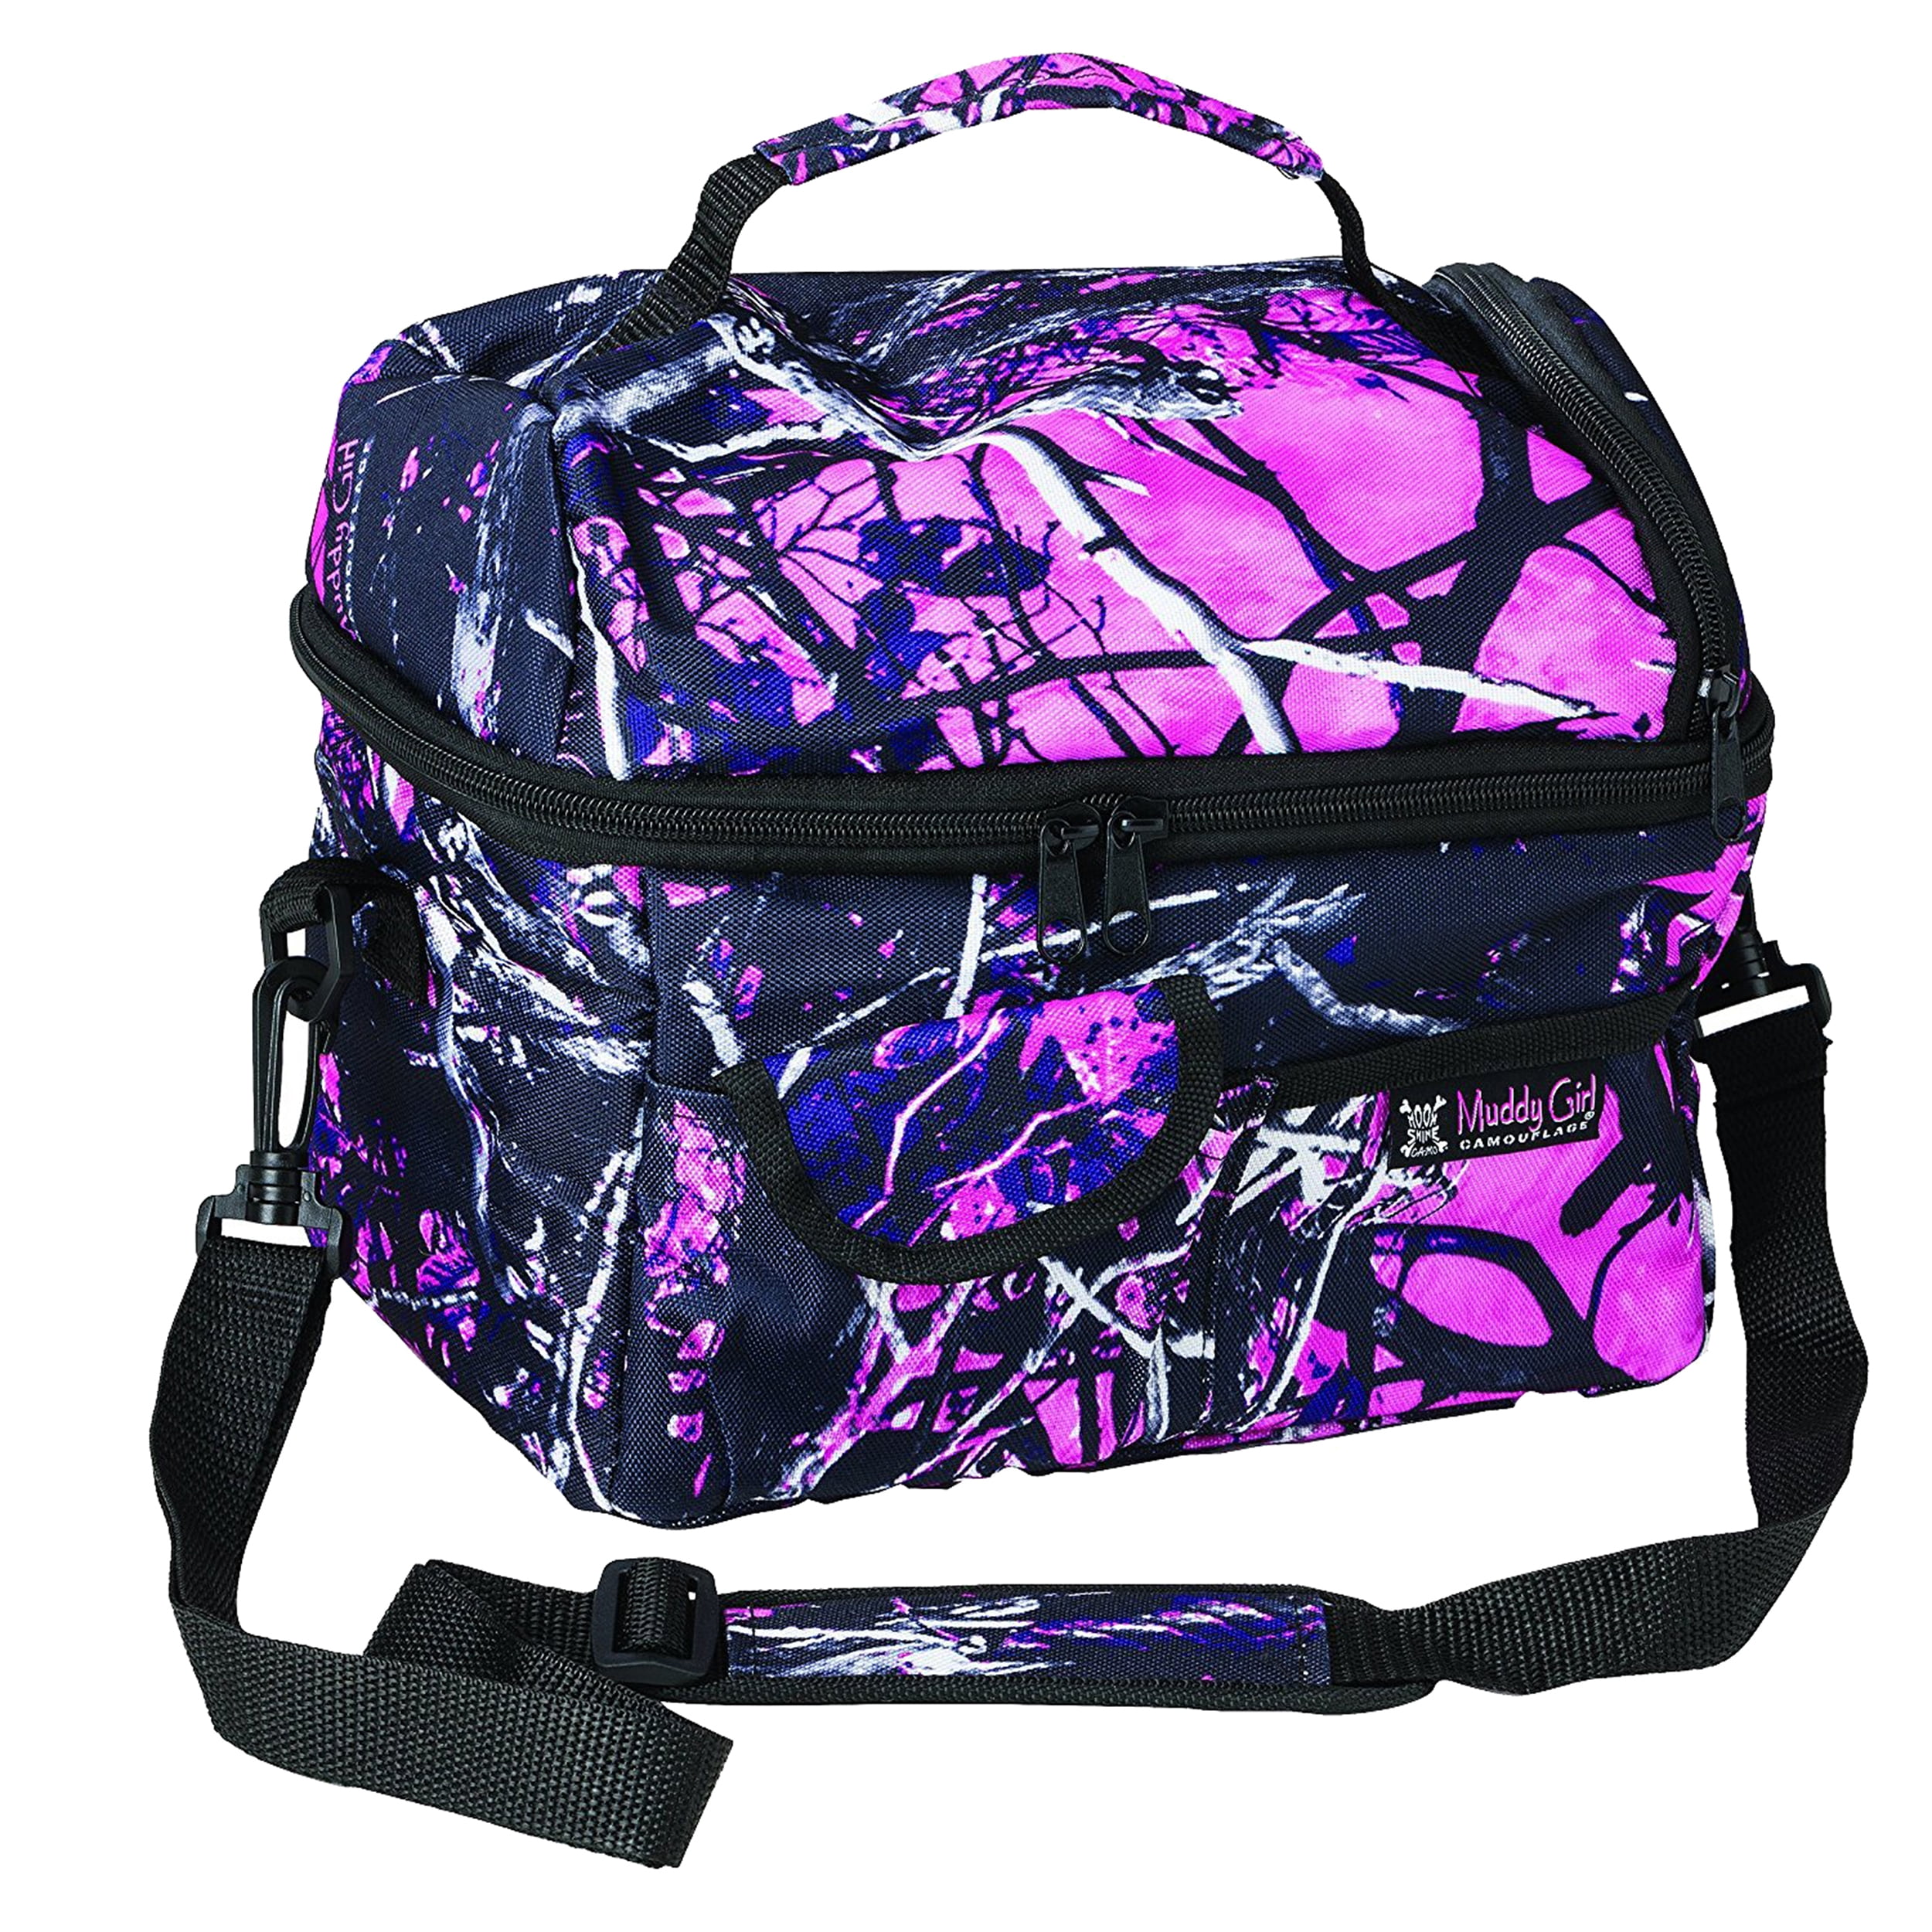 Muddy Girl Camo Insulated Cooler Lunch Box Bag Moonshine Pink Purple Camouflage 